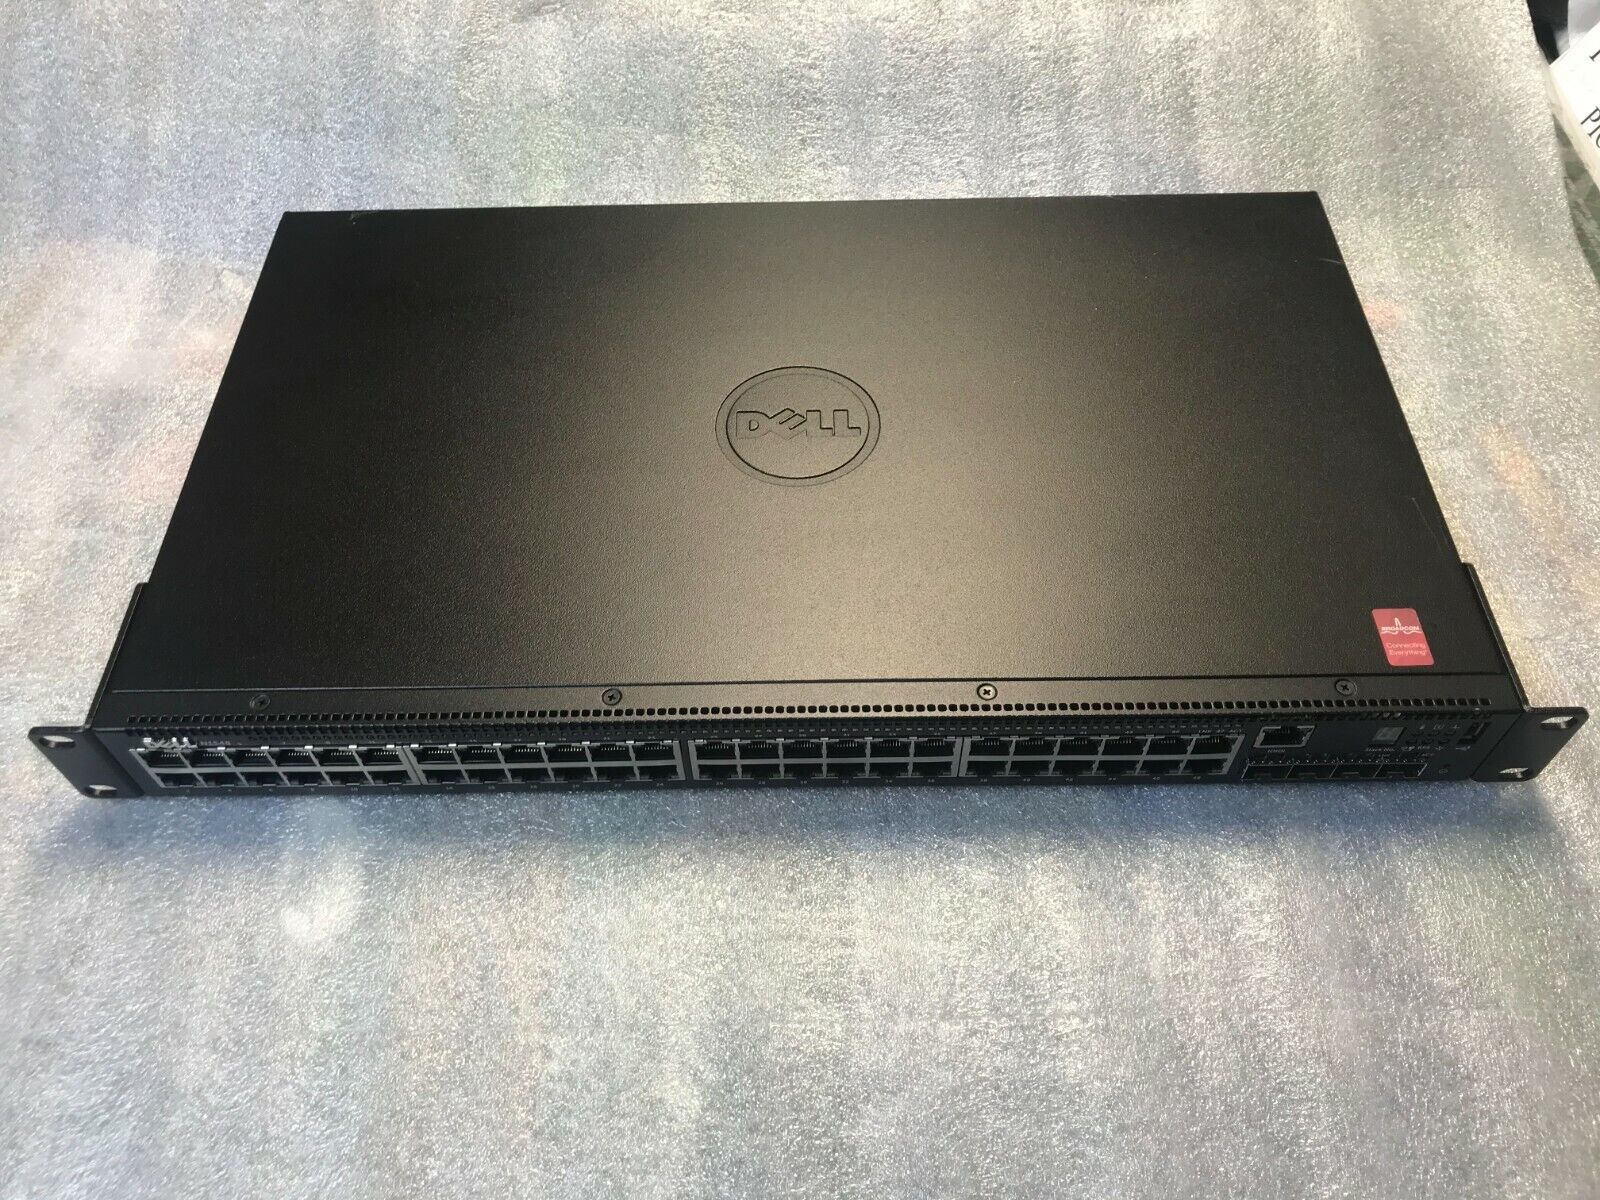 N1548 Dell Networking 48-Port Gigabit Ethernet Switch USED